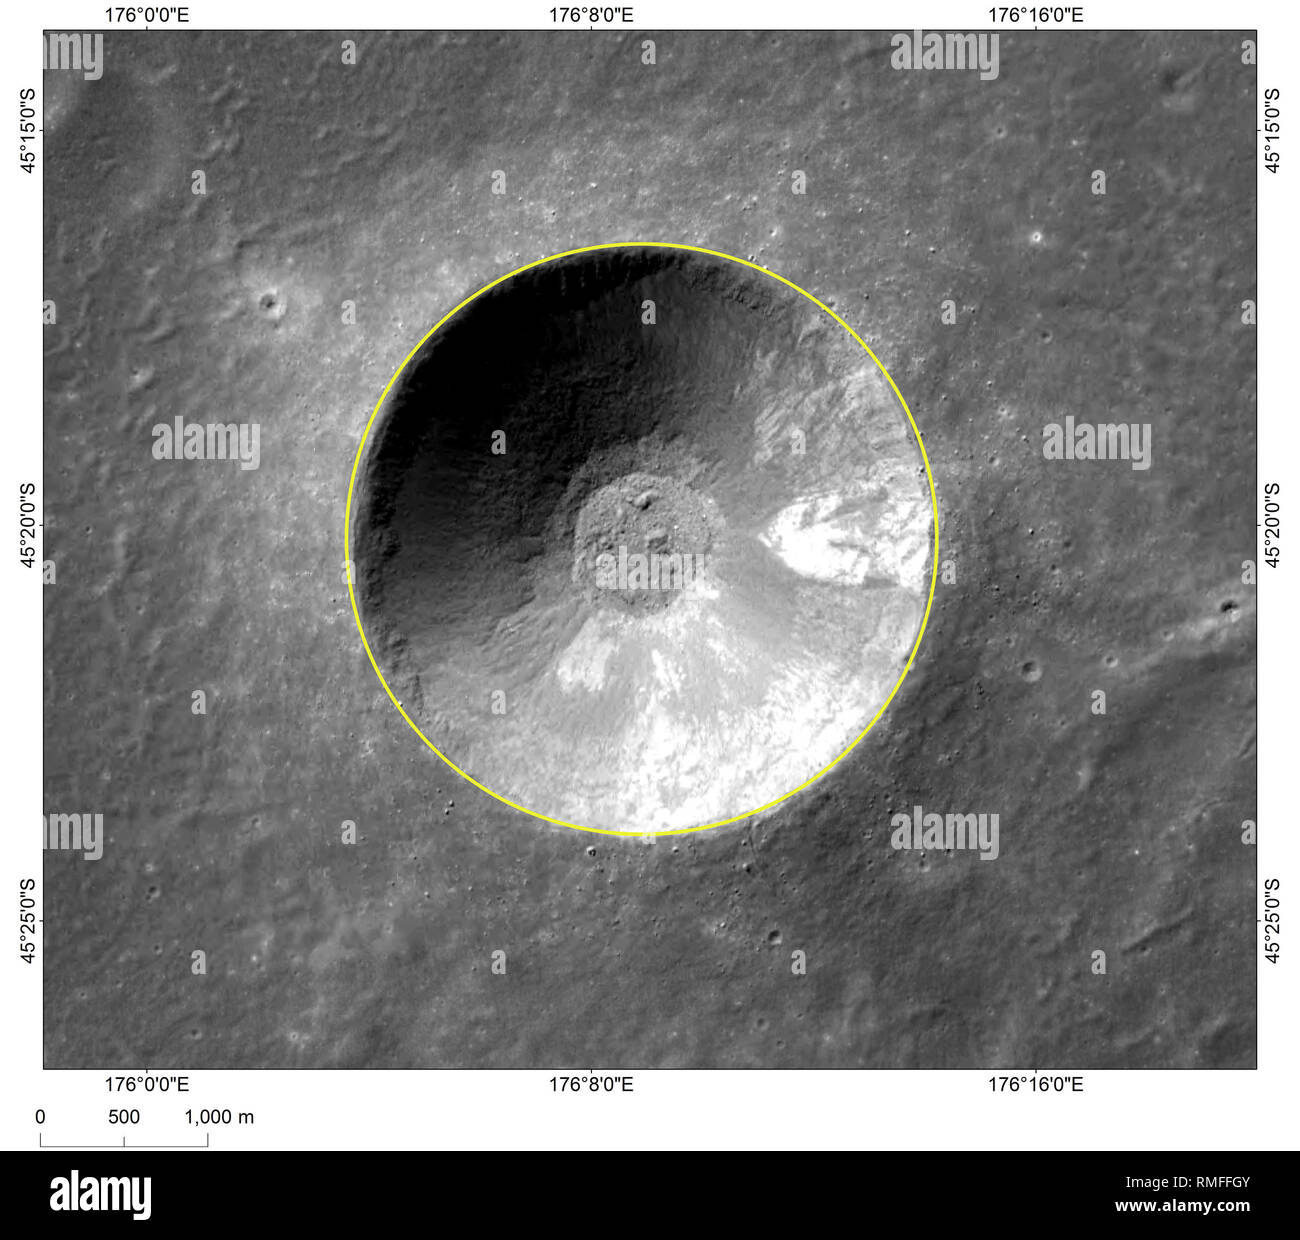 (190215) -- BEIJING, Feb. 15, 2019 (Xinhua) --     Photo provided by the China National Space Administration (CNSA) shows the image of Zhinyu, a crater near 'Statio Tianhe', the landing site of China's Chang'e-4 lunar probe.     The landing site of China's Chang'e-4 lunar probe has been named 'Statio Tianhe' after the spacecraft made the first-ever soft landing on the far side of the moon last month.     Together with three nearby impact craters and one hill, the name was approved by the International Astronomical Union (IAU), Liu Jizhong, director of the China Lunar Exploration and Space Engi Stock Photo